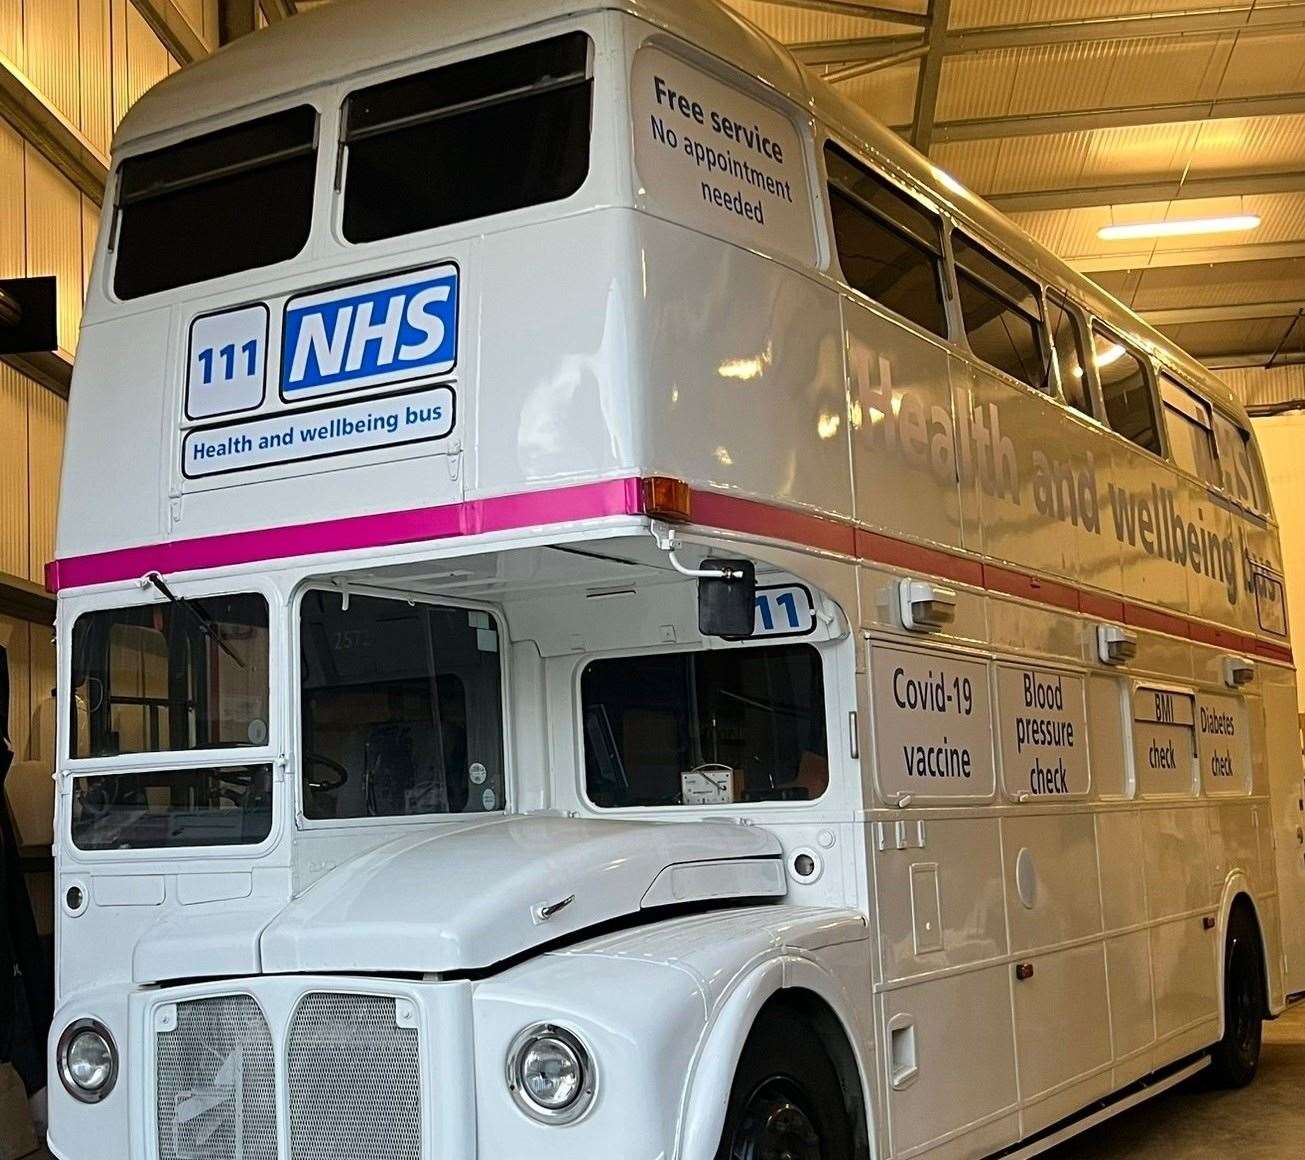 NHS health and wellbeing bus is coming to Medway, it will spend time in the Asda car parks in Strood and Gillingham